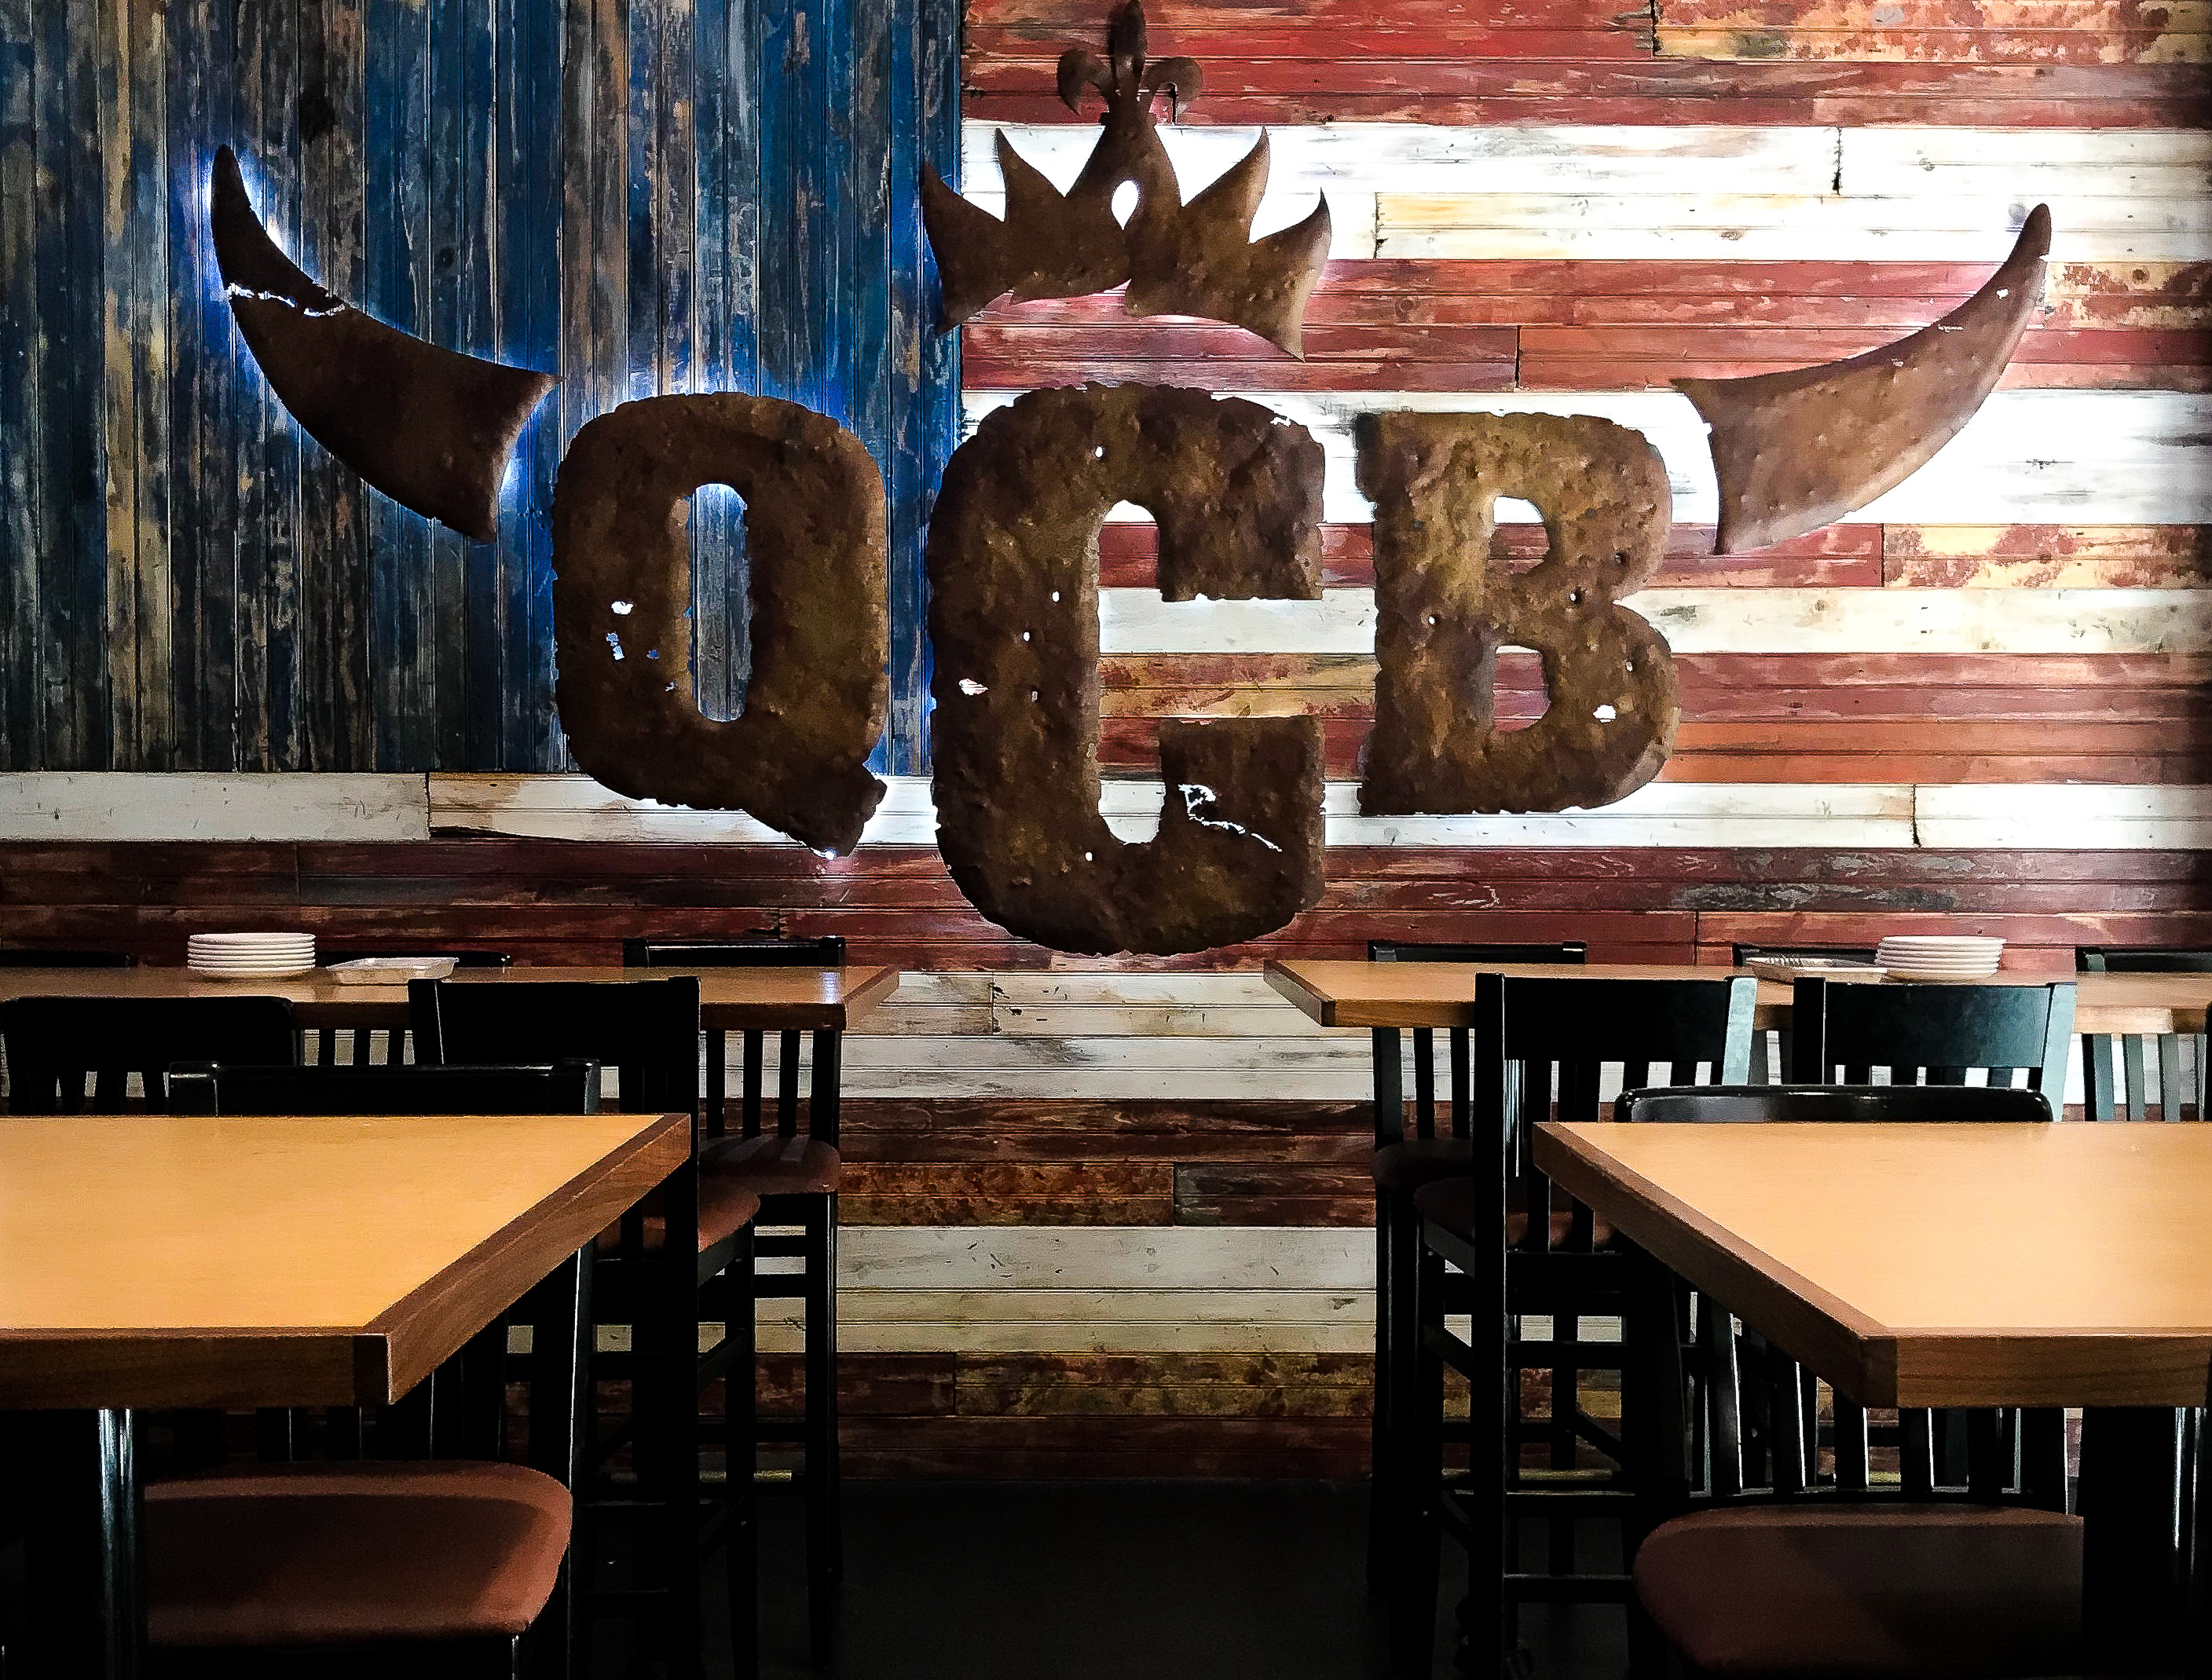 Queen City BBQ You say Dad, we say BBQ! Head over to Queen City BBQ for an additional 10% off your meal this Father’s Day!